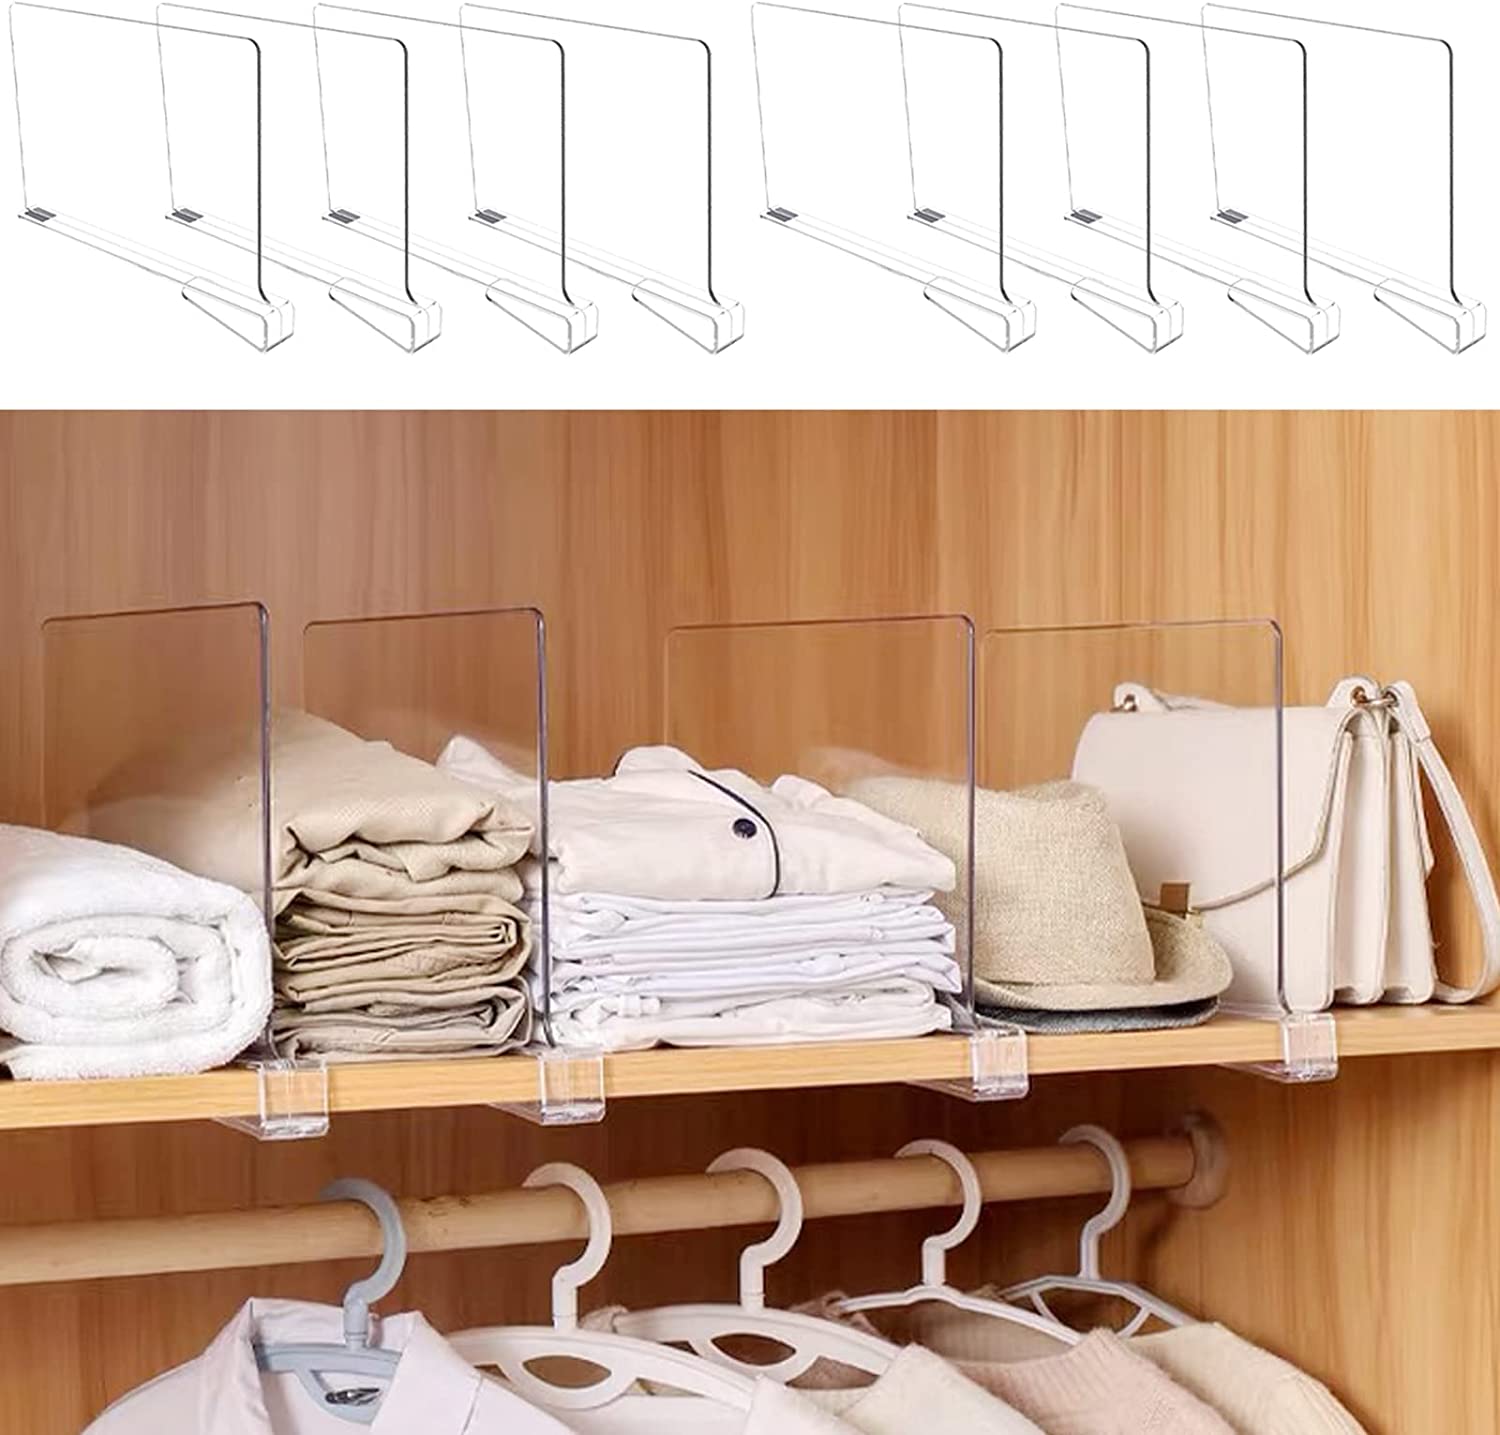 15 Clever Ways to Organize Underwear Without Using Drawers – All About Tidy